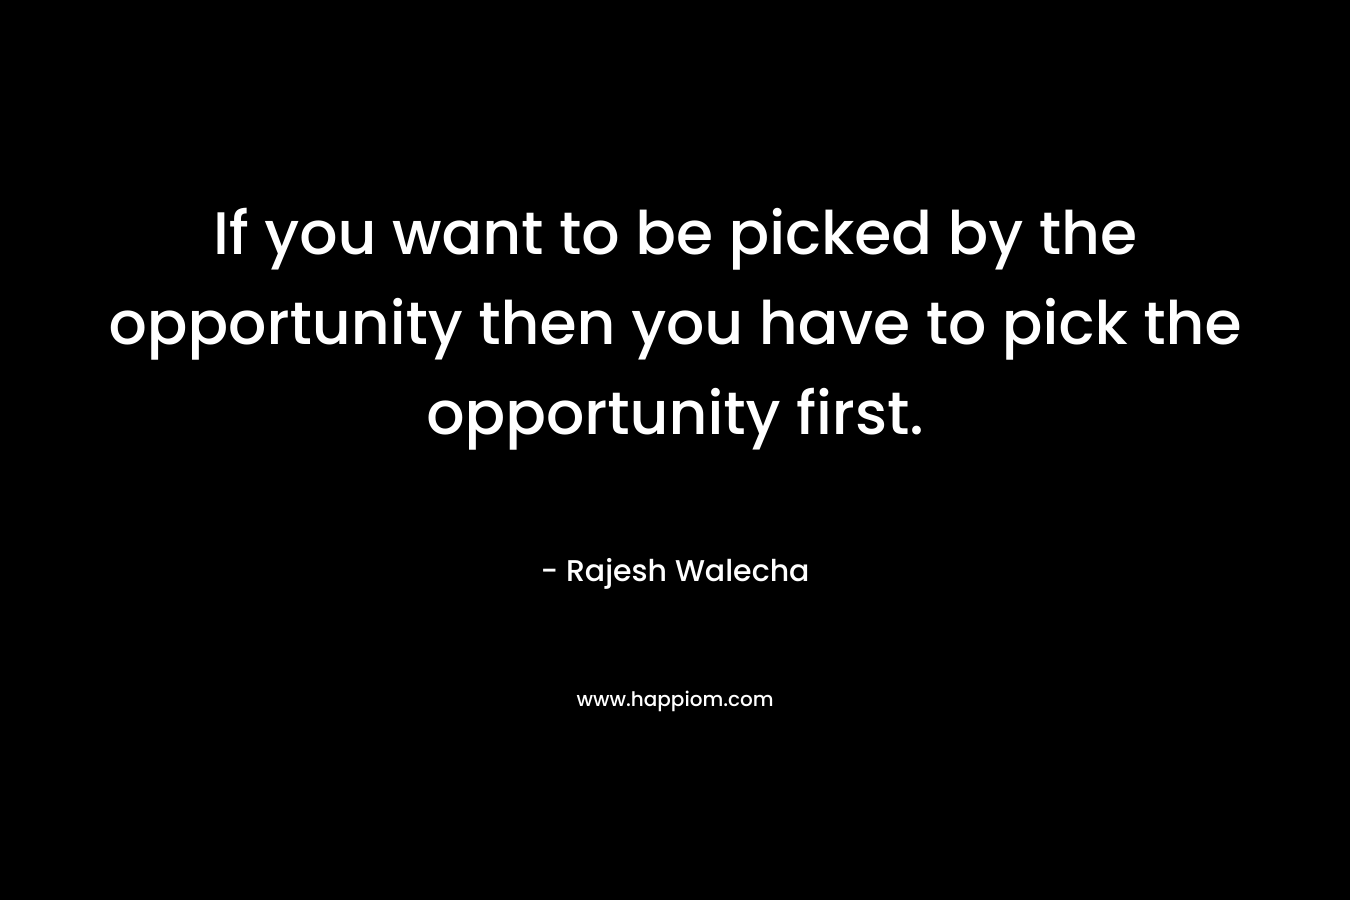 If you want to be picked by the opportunity then you have to pick the opportunity first.